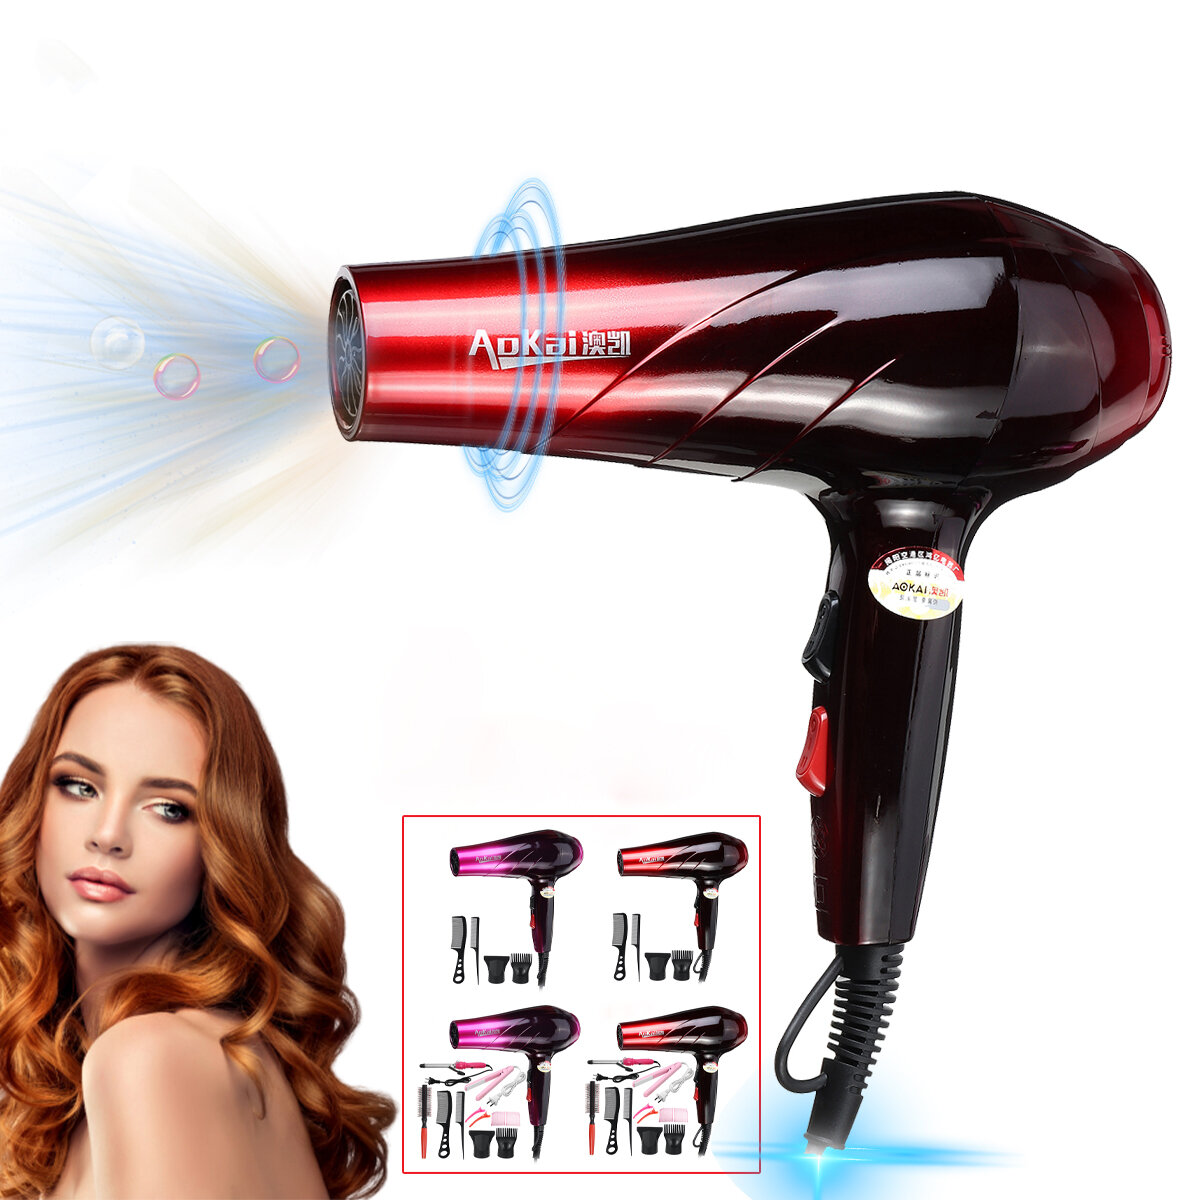 Gradient 5 Stages Adjustment Anion Hair Dryer Switch Control Strong Power Hair Dryer Heat Balance Fast Drying Hair Dryer